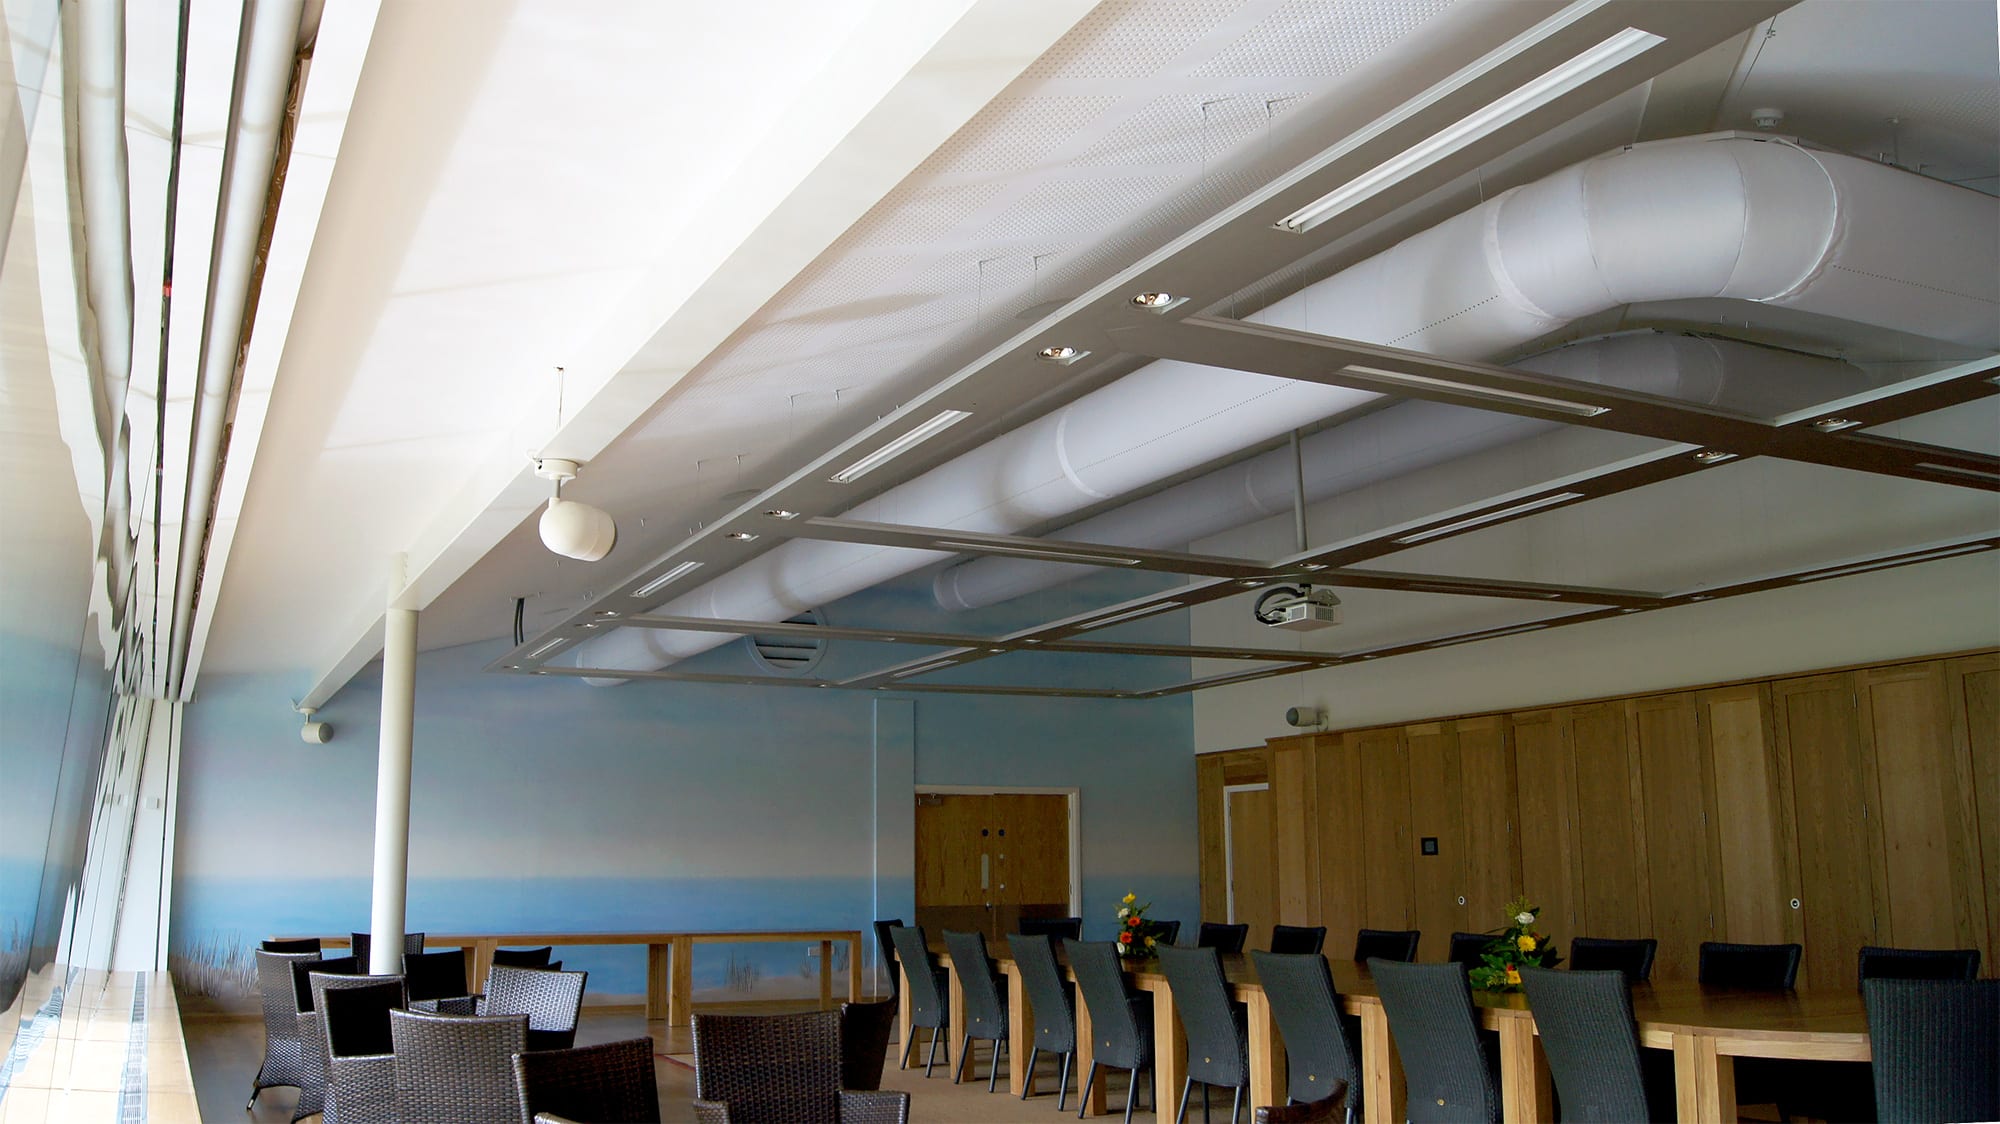 Prihoda fabric ductwork in a conference room